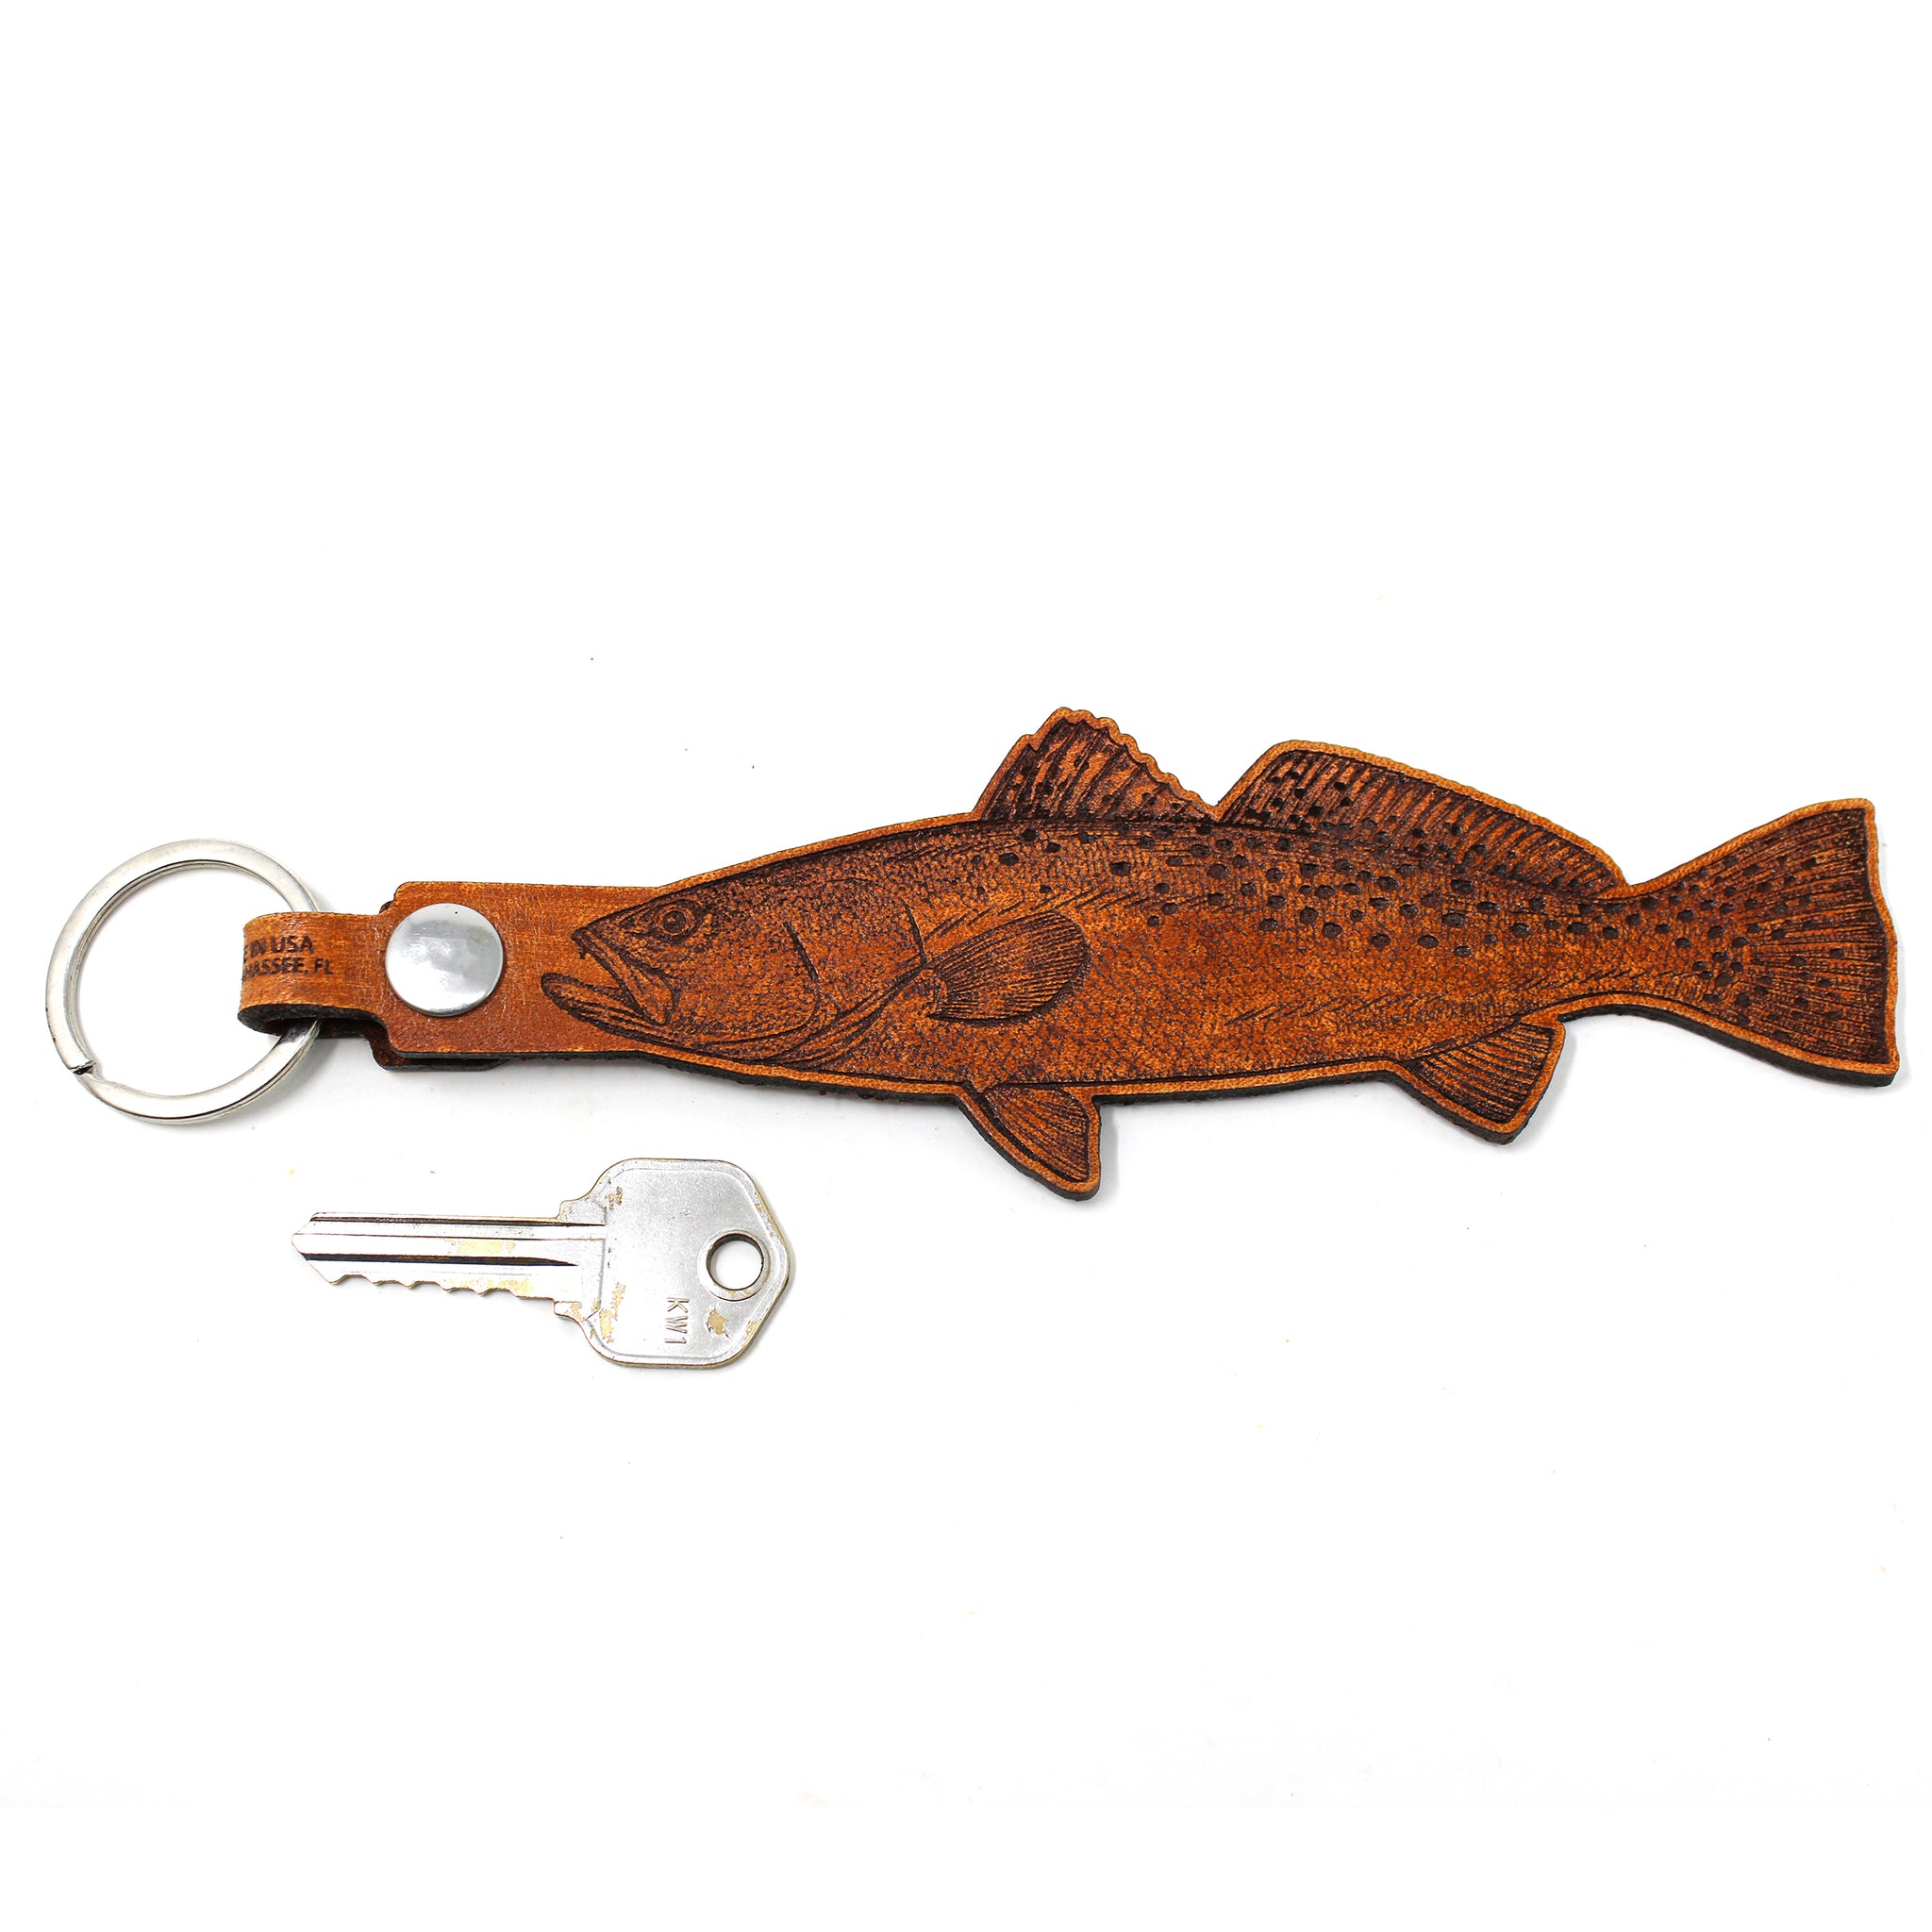 Leather Keychain - Large Spotted Sea Trout Keychain